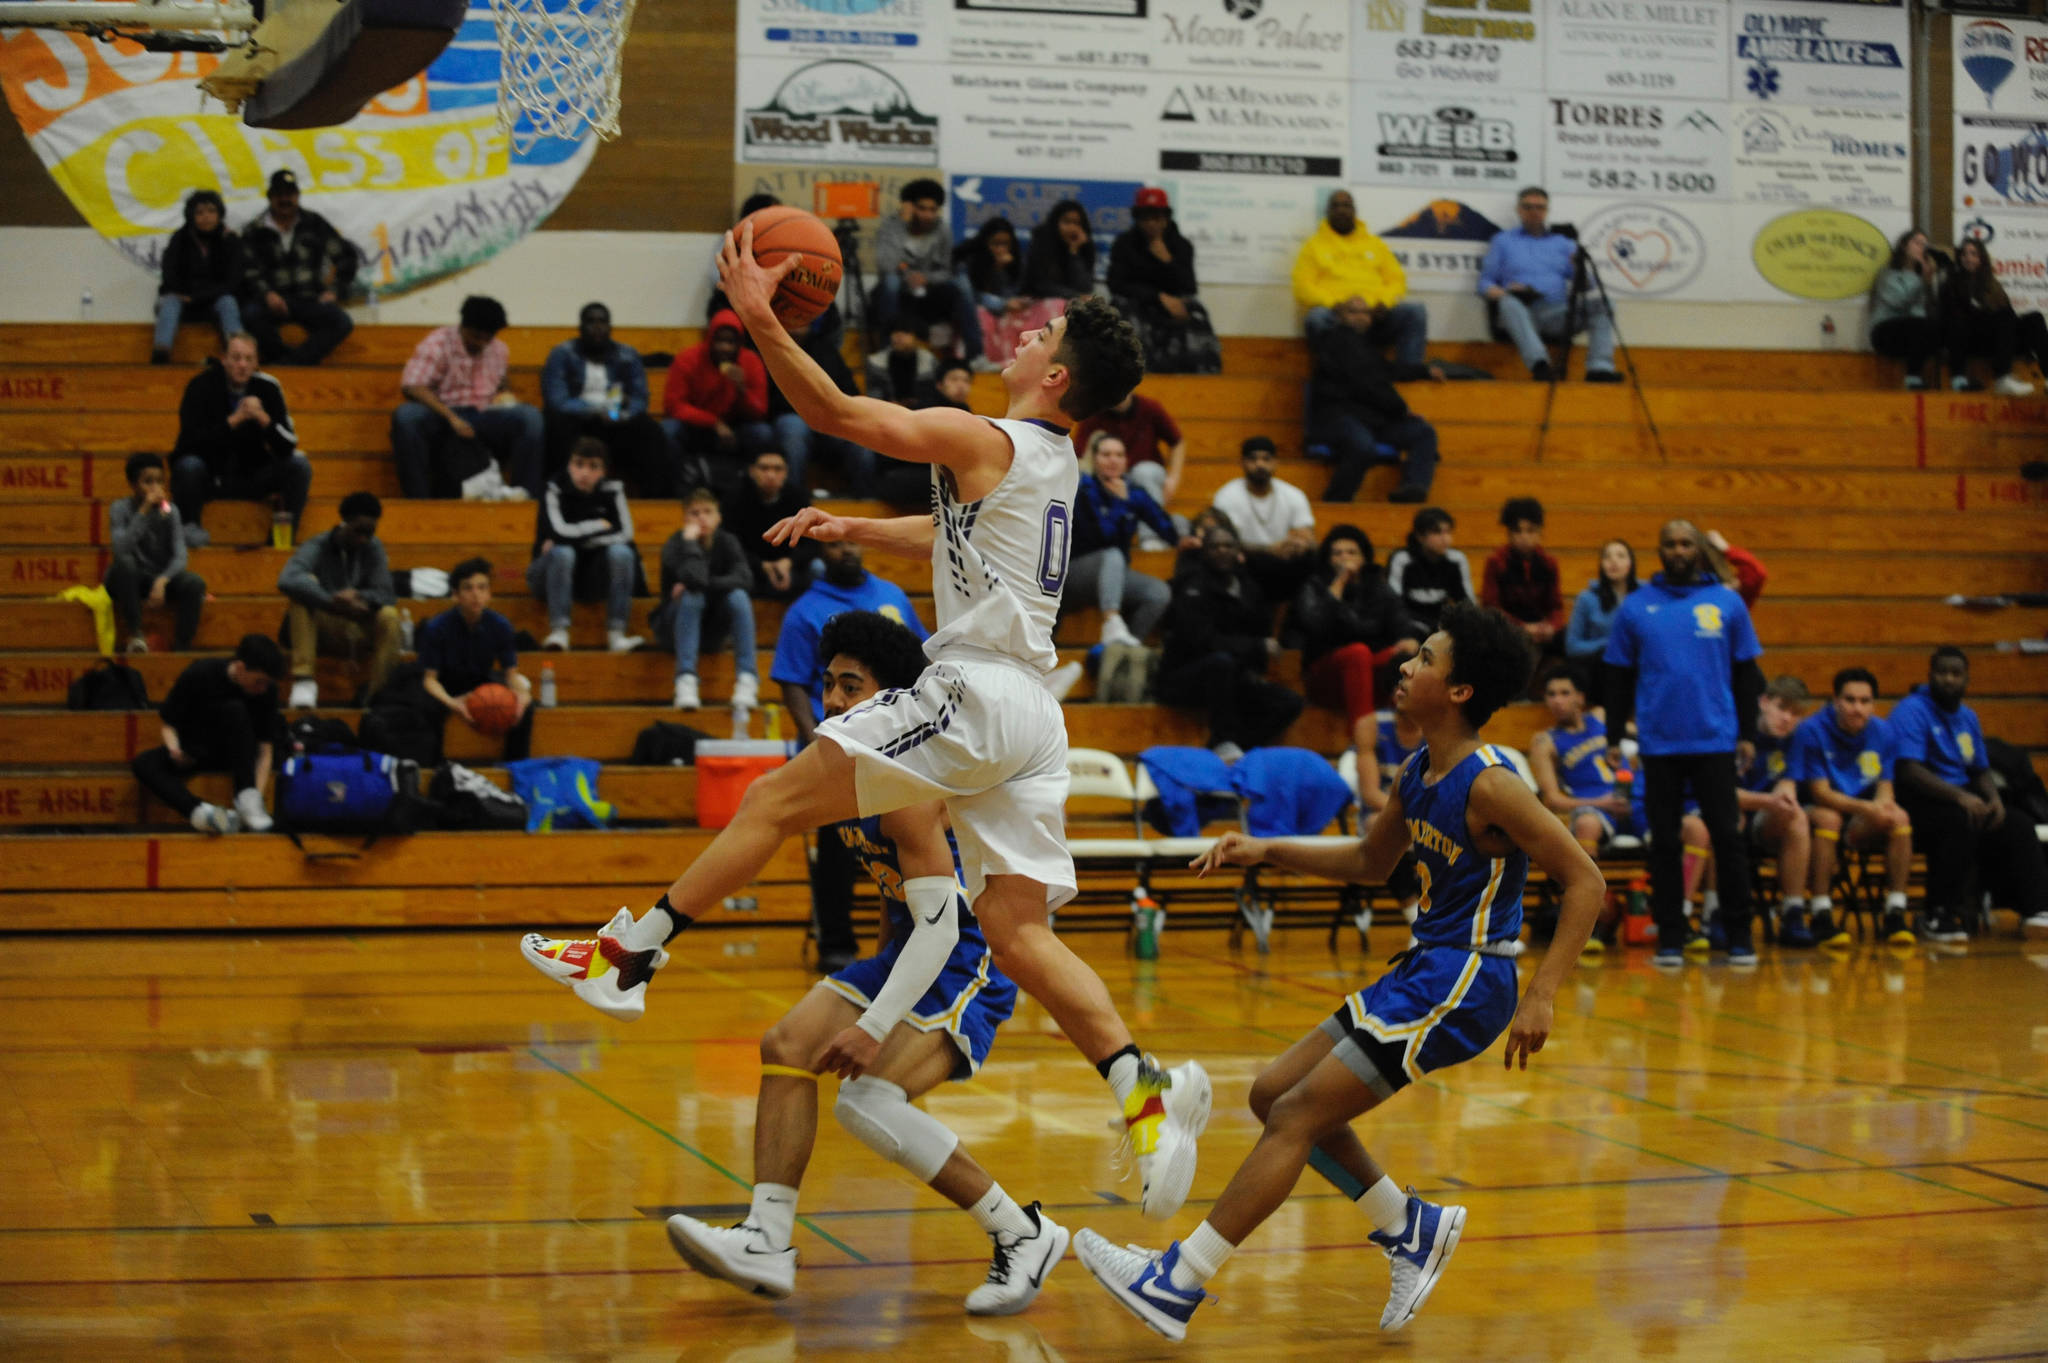 Sequim’s Dallin Despain (0) goes up for a fast-break layup in the second quarter of the Sequim Wolves’ 77-62 loss to the Bremerton Knights on Dec. 17.